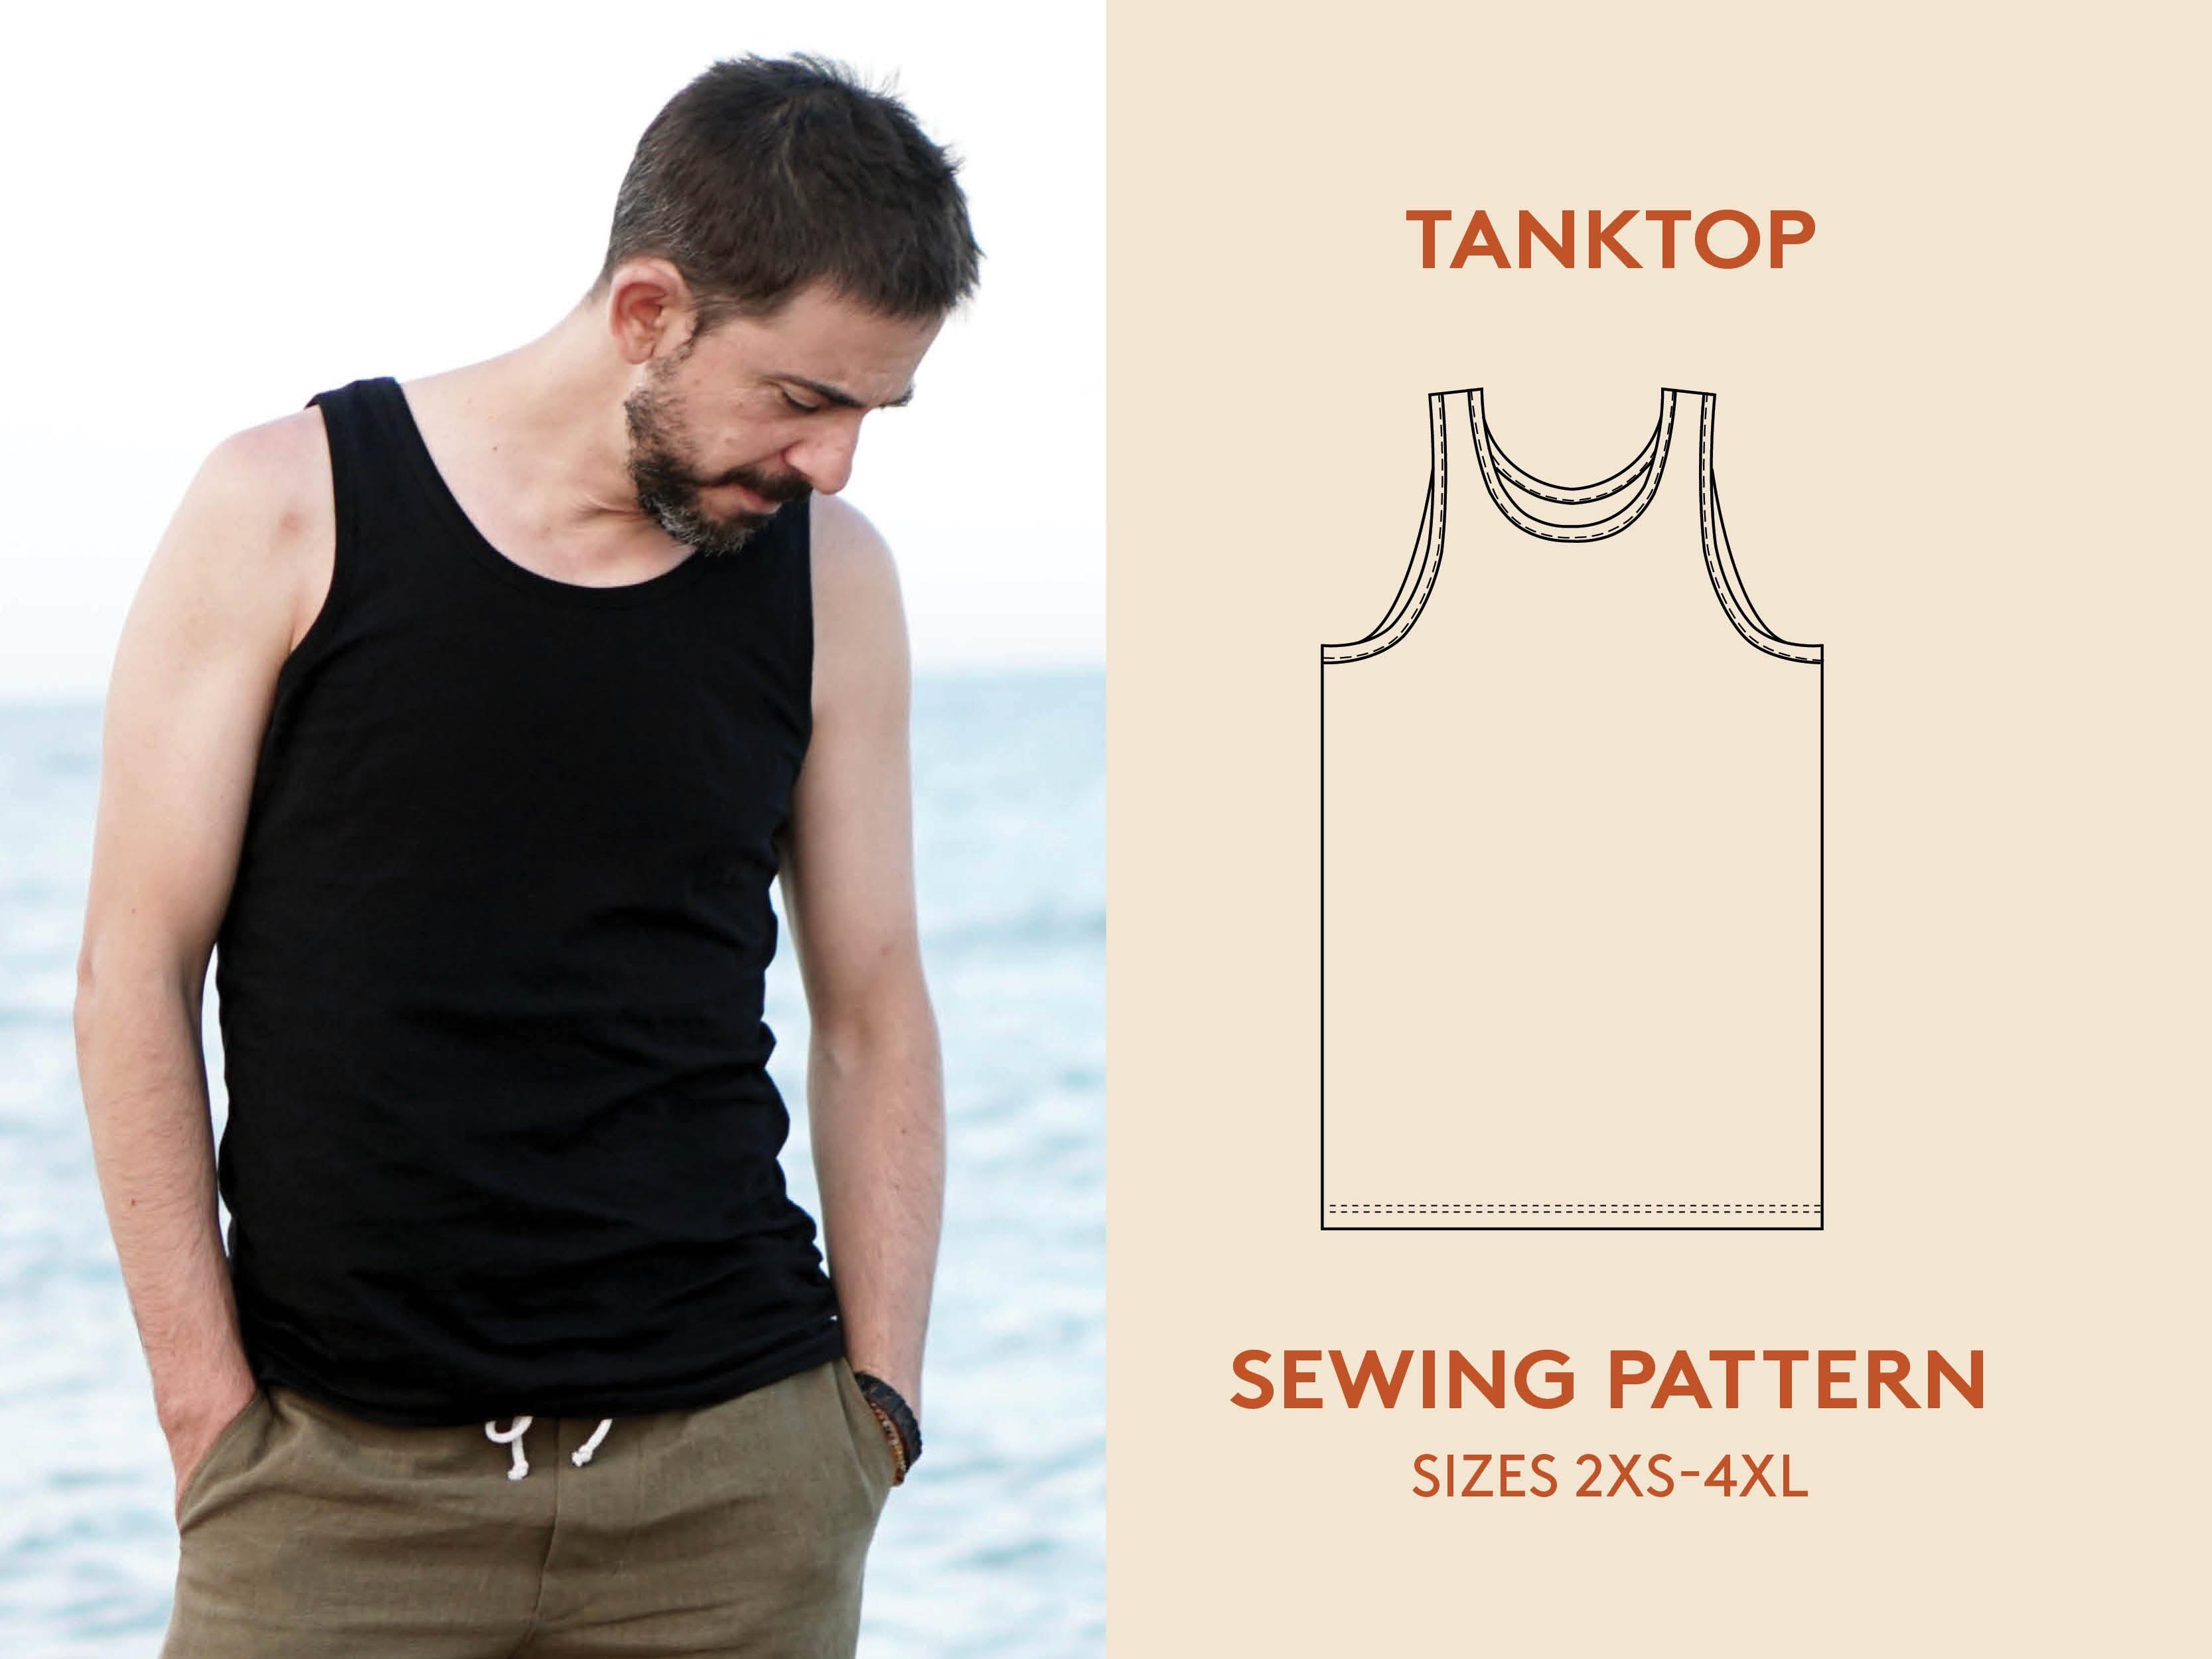 Men's Plus Size Tank Tops, Extra Large Sizes Up To 4XL